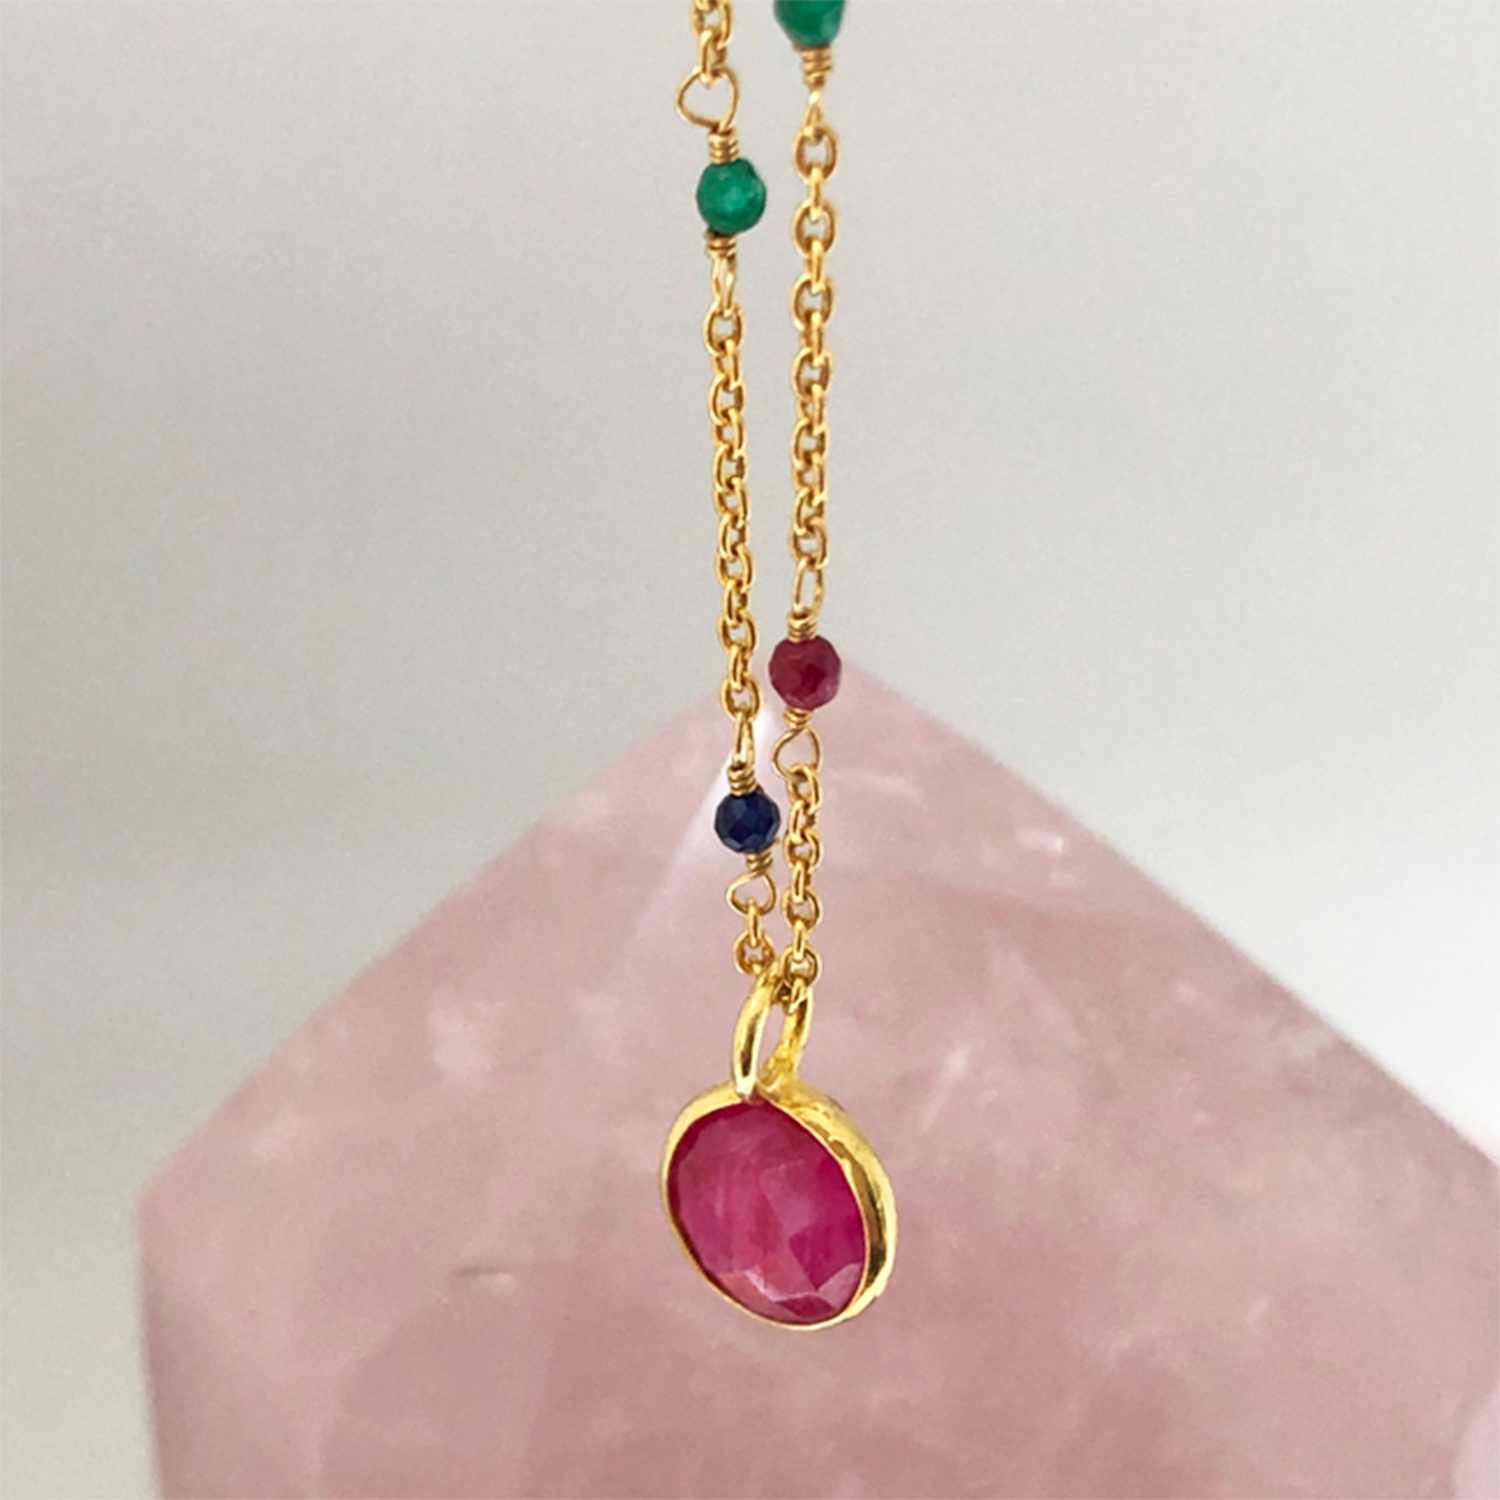 Fancy Rosary with Astro Ruby Pendant - Mirabelle Jewellery